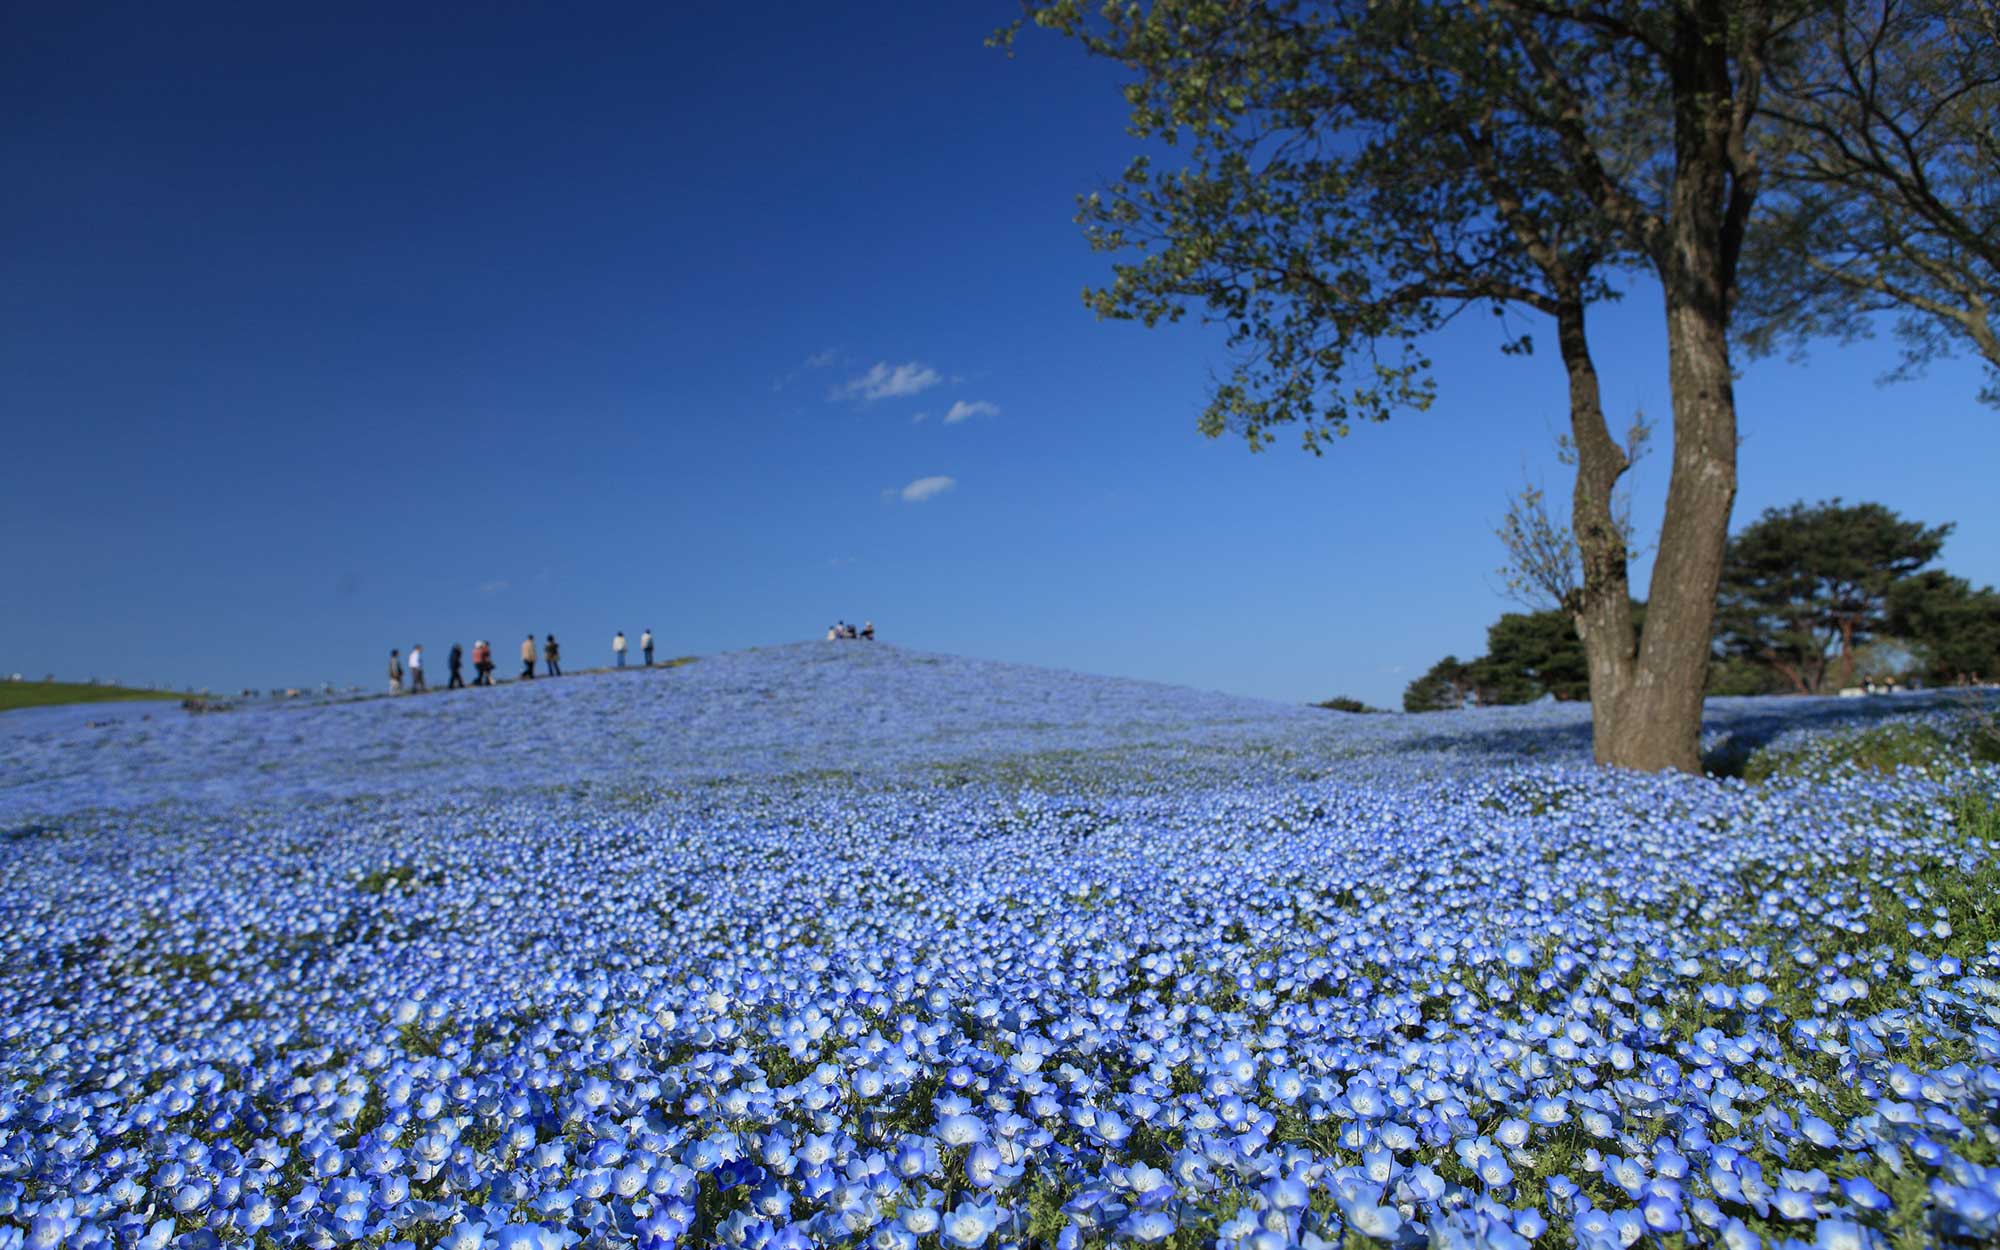 Over 4 Million Blue Flowers Bloomed at a Japanese Park | Travel + ...